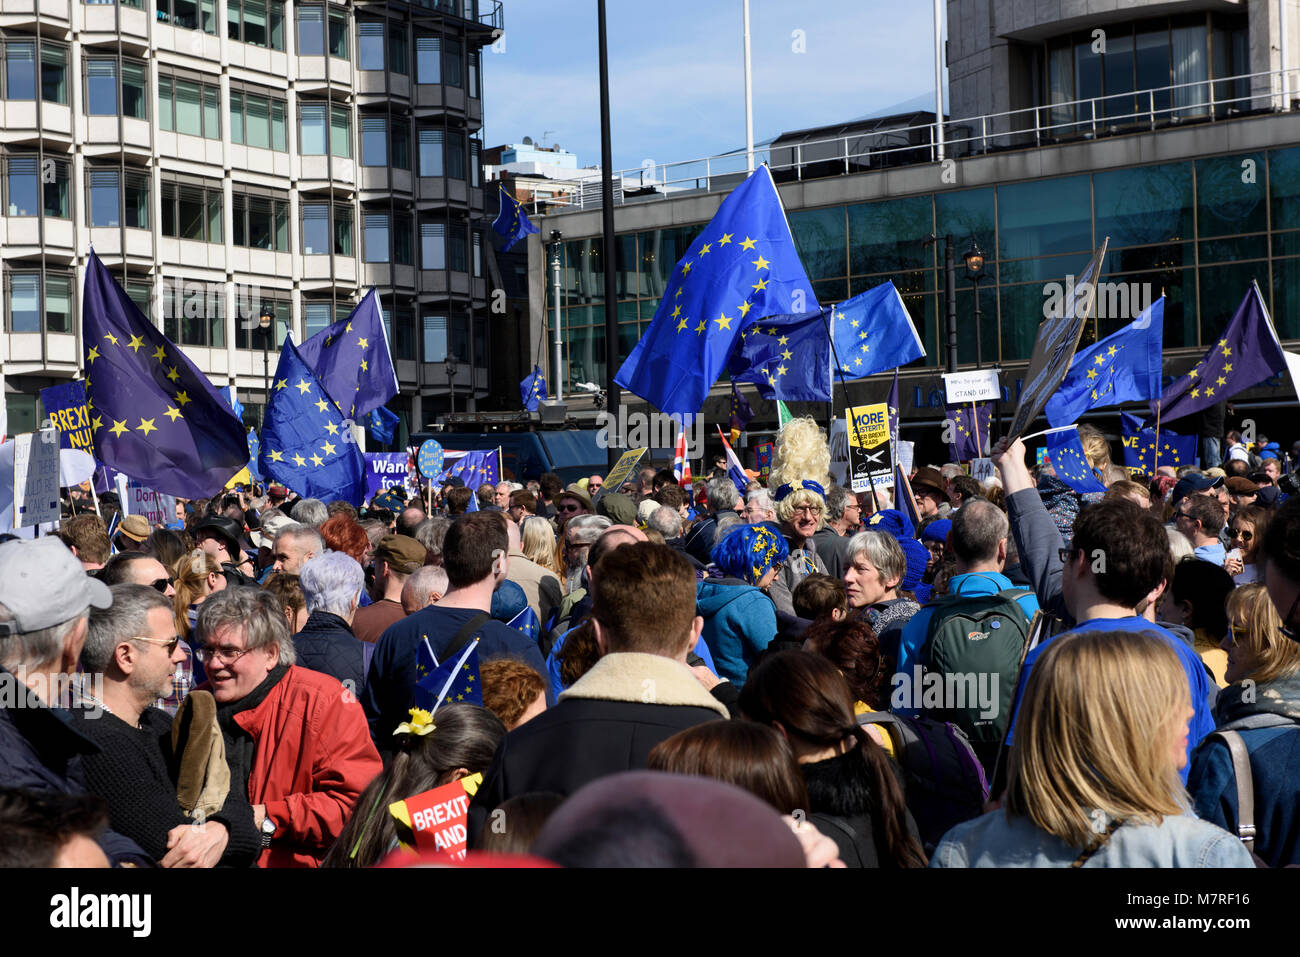 A crowd of EU supporters holding anti-Brexit placards and waving EU flags during the Unite for Europe march - anti-Brexit protest in London, UK. Stock Photo